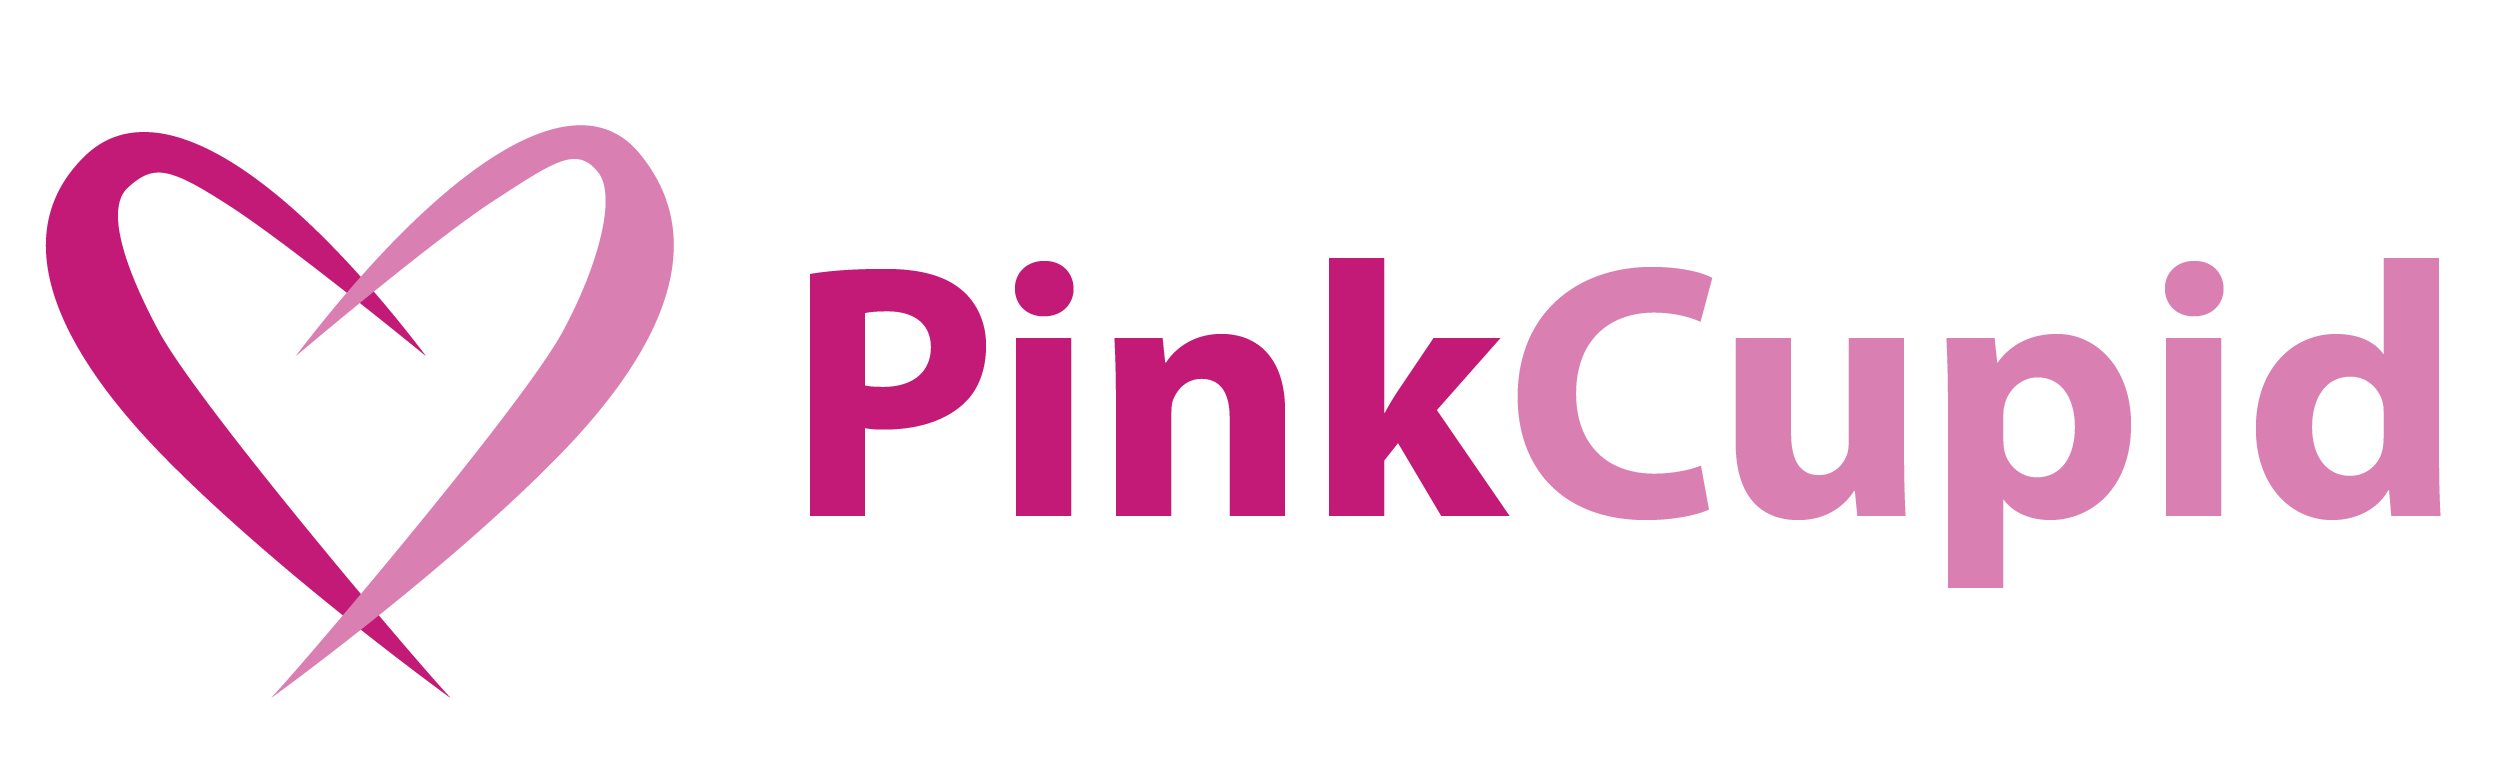 Pink Cupid Review in 2019 - Read Our Scam Report! - RomanceScams.org